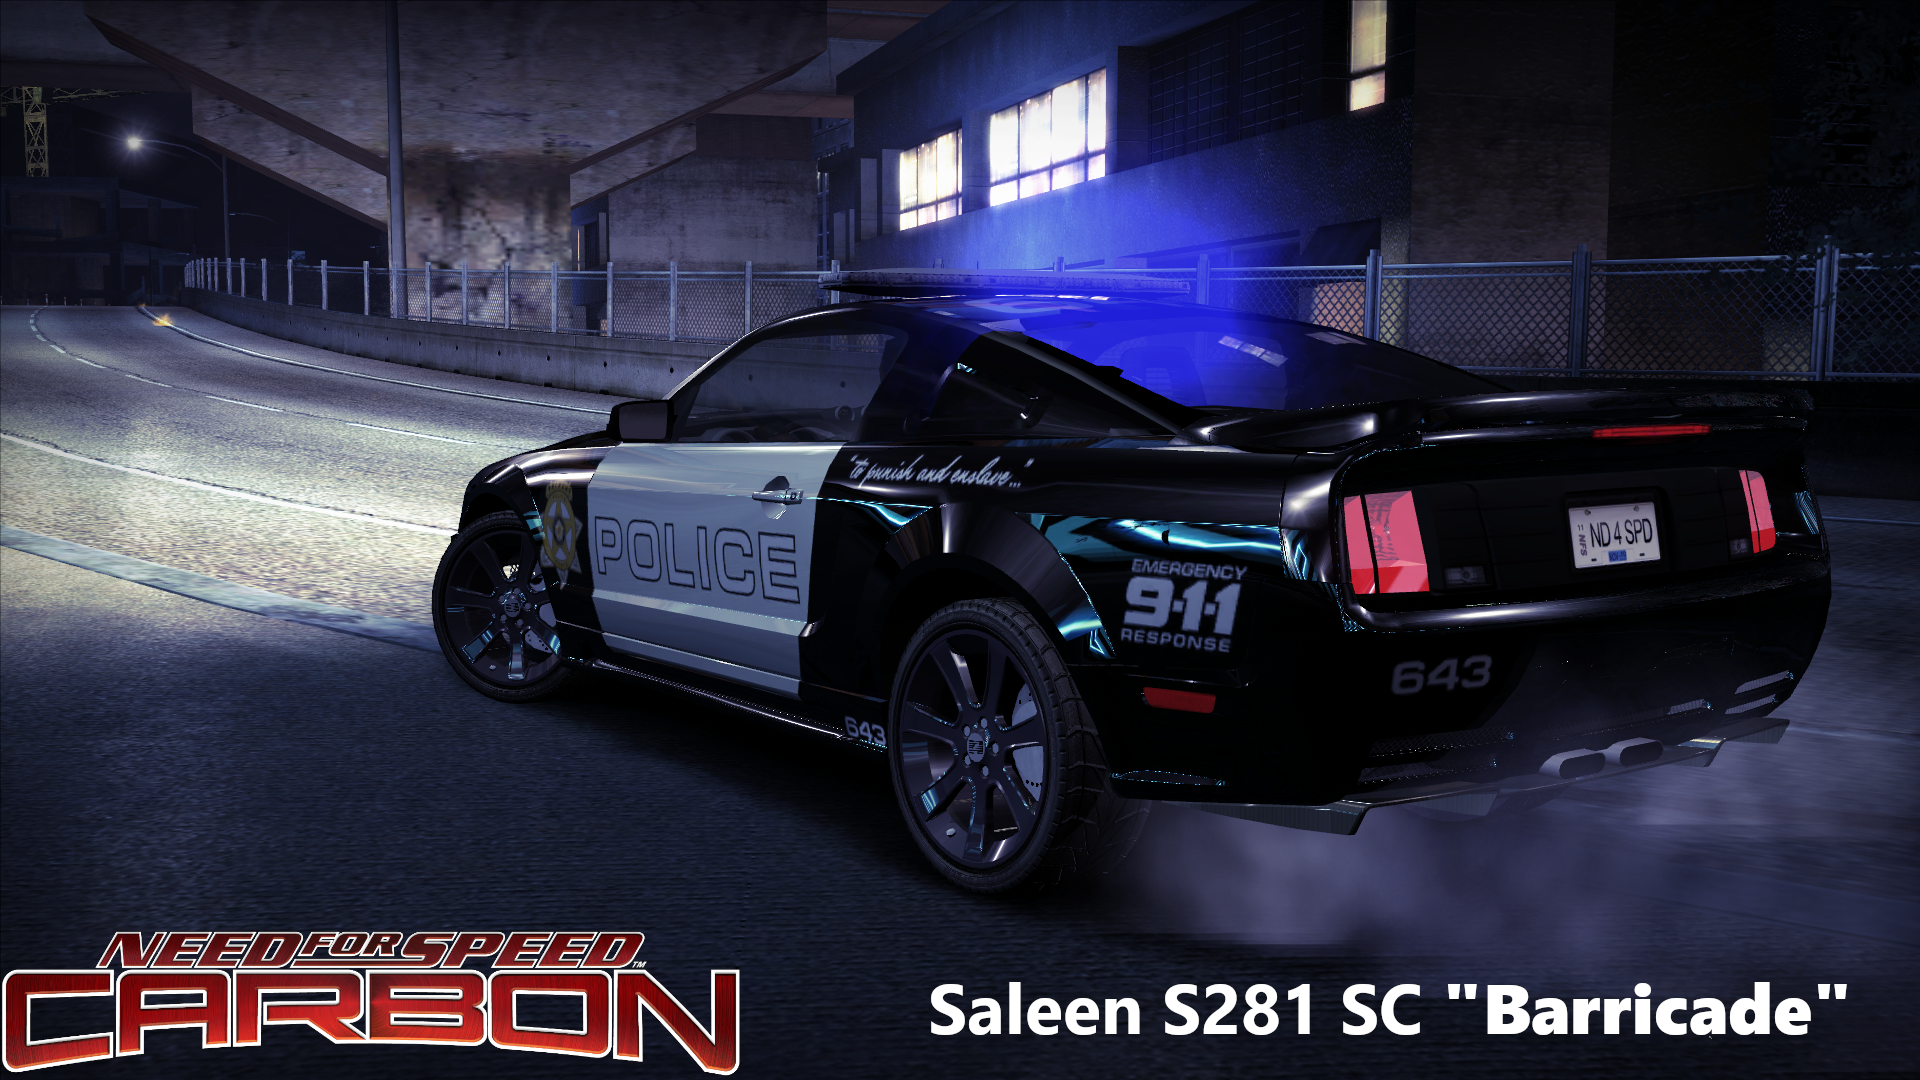 Need For Speed Carbon Saleen 2005 S281 SC "Barricade"